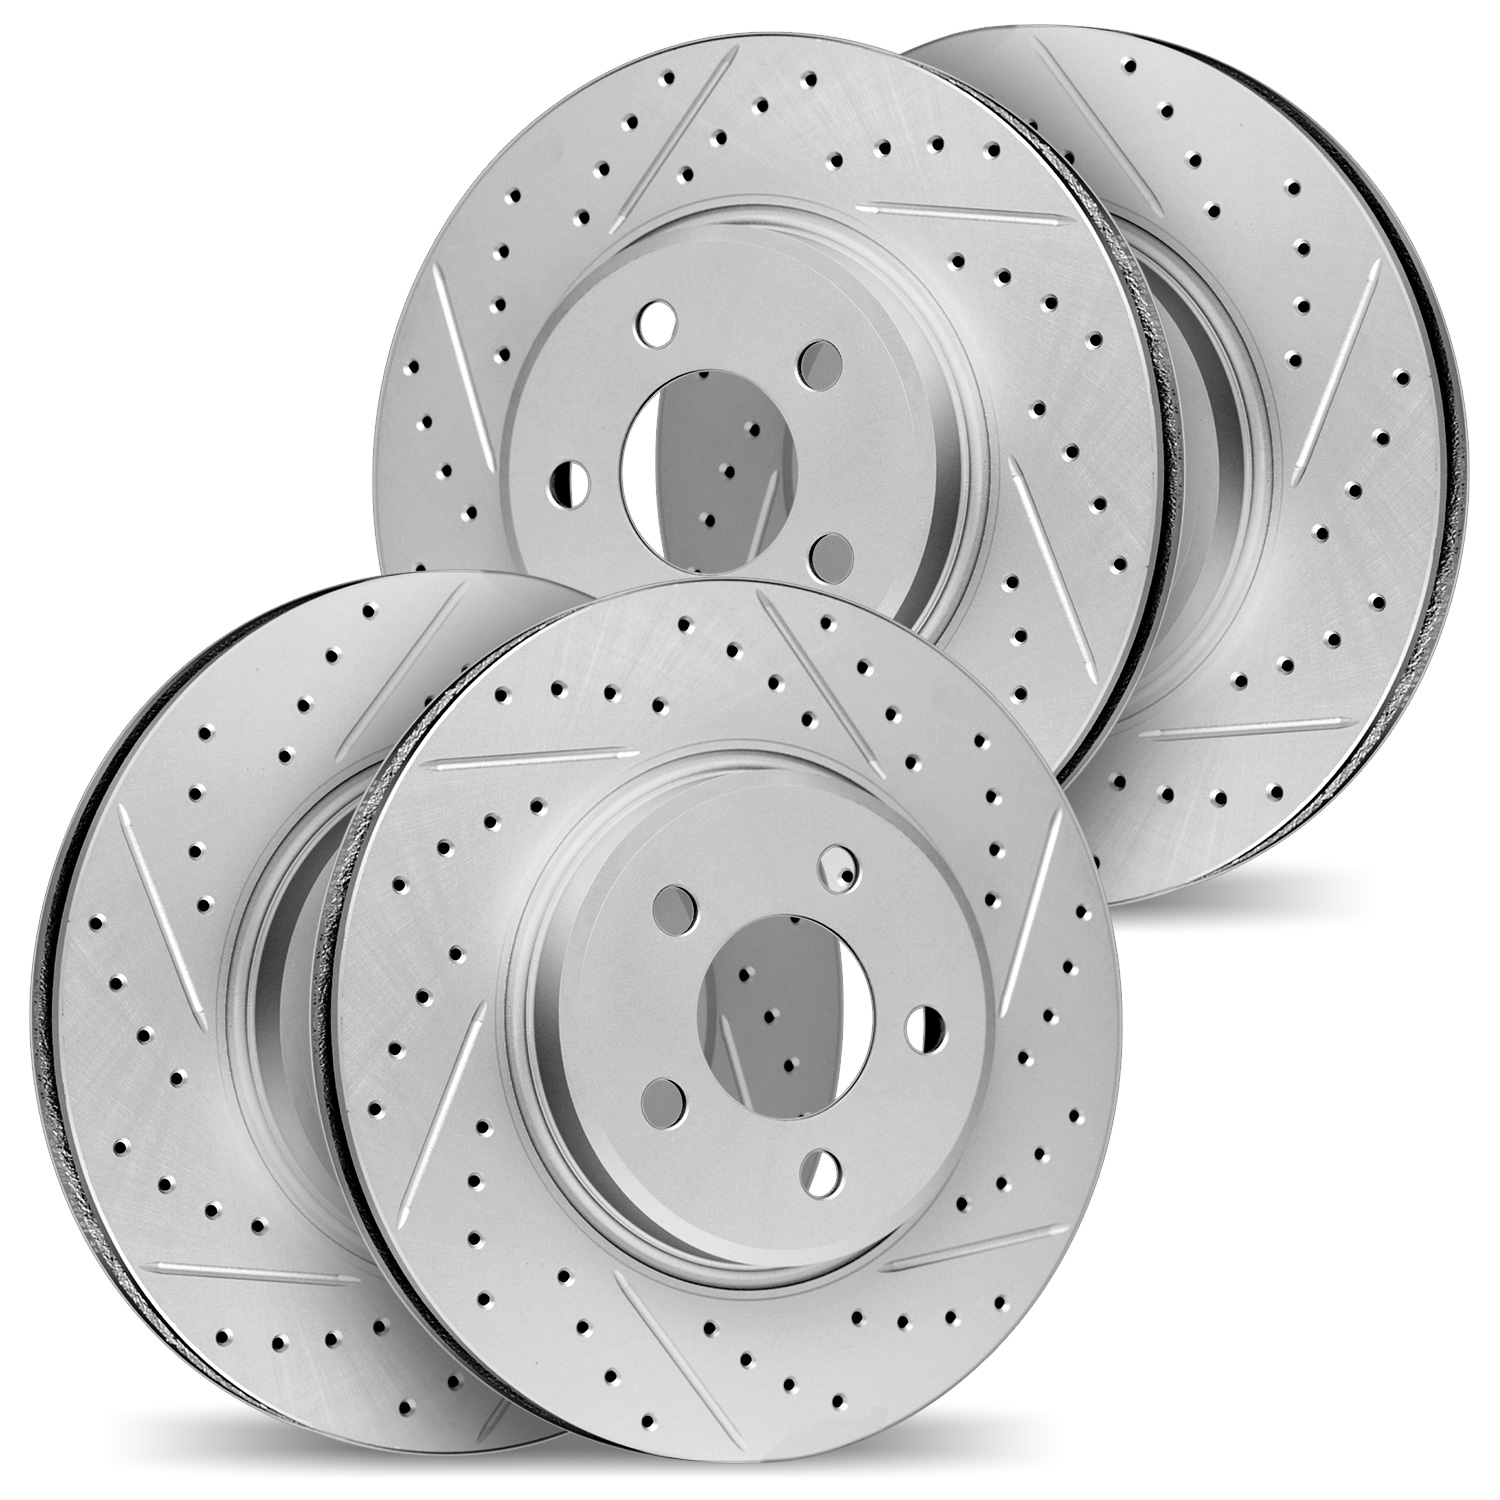 2004-67045 Geoperformance Drilled/Slotted Brake Rotors, Fits Select Infiniti/Nissan, Position: Front and Rear